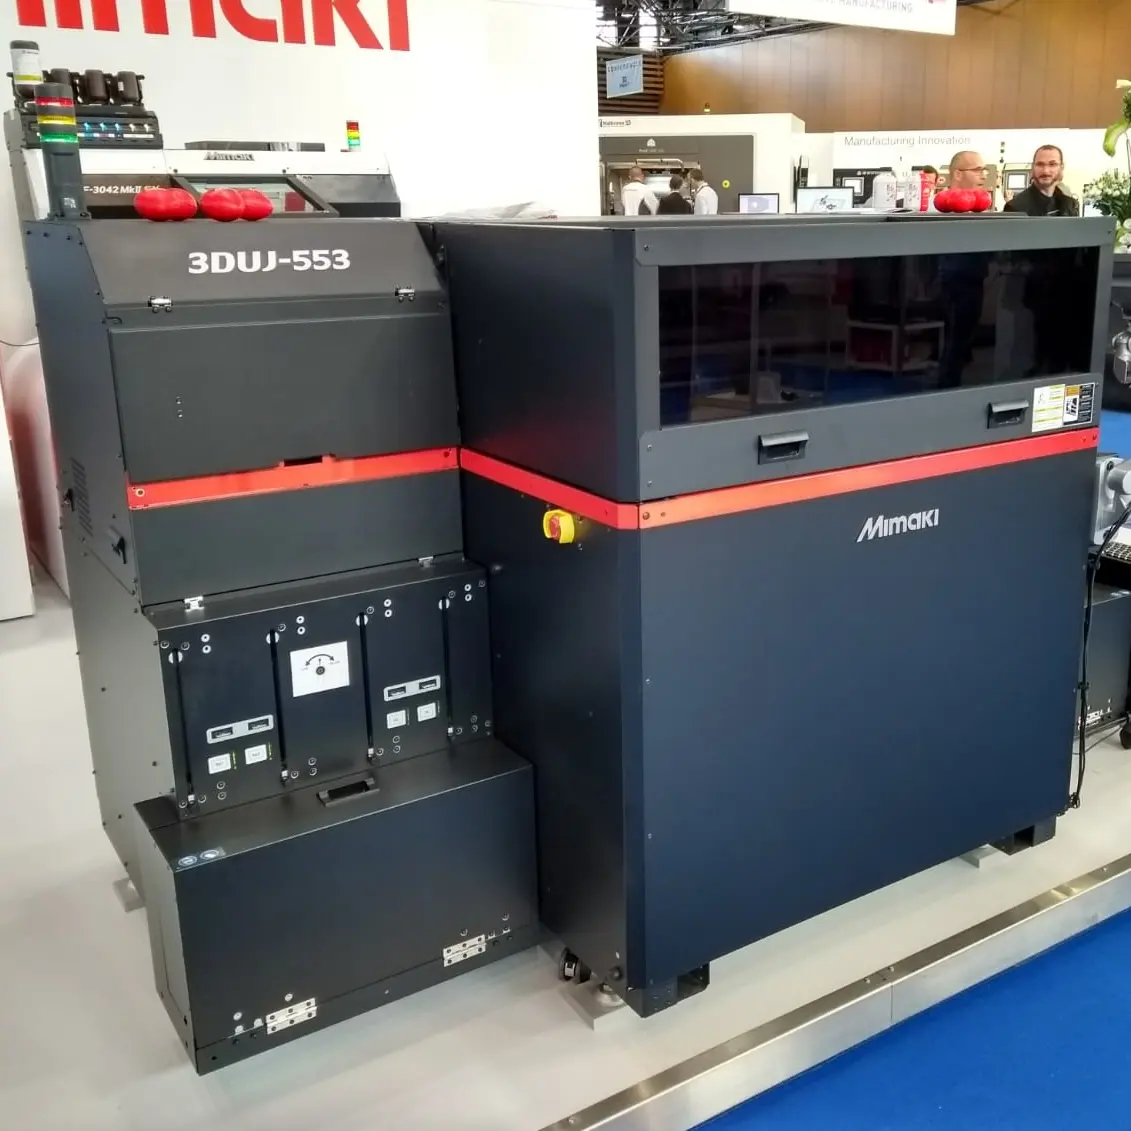 Mimaki 3duj-553 Is The First 3D Modelling System in The World to Print in Over 10,000,000 Different Colours